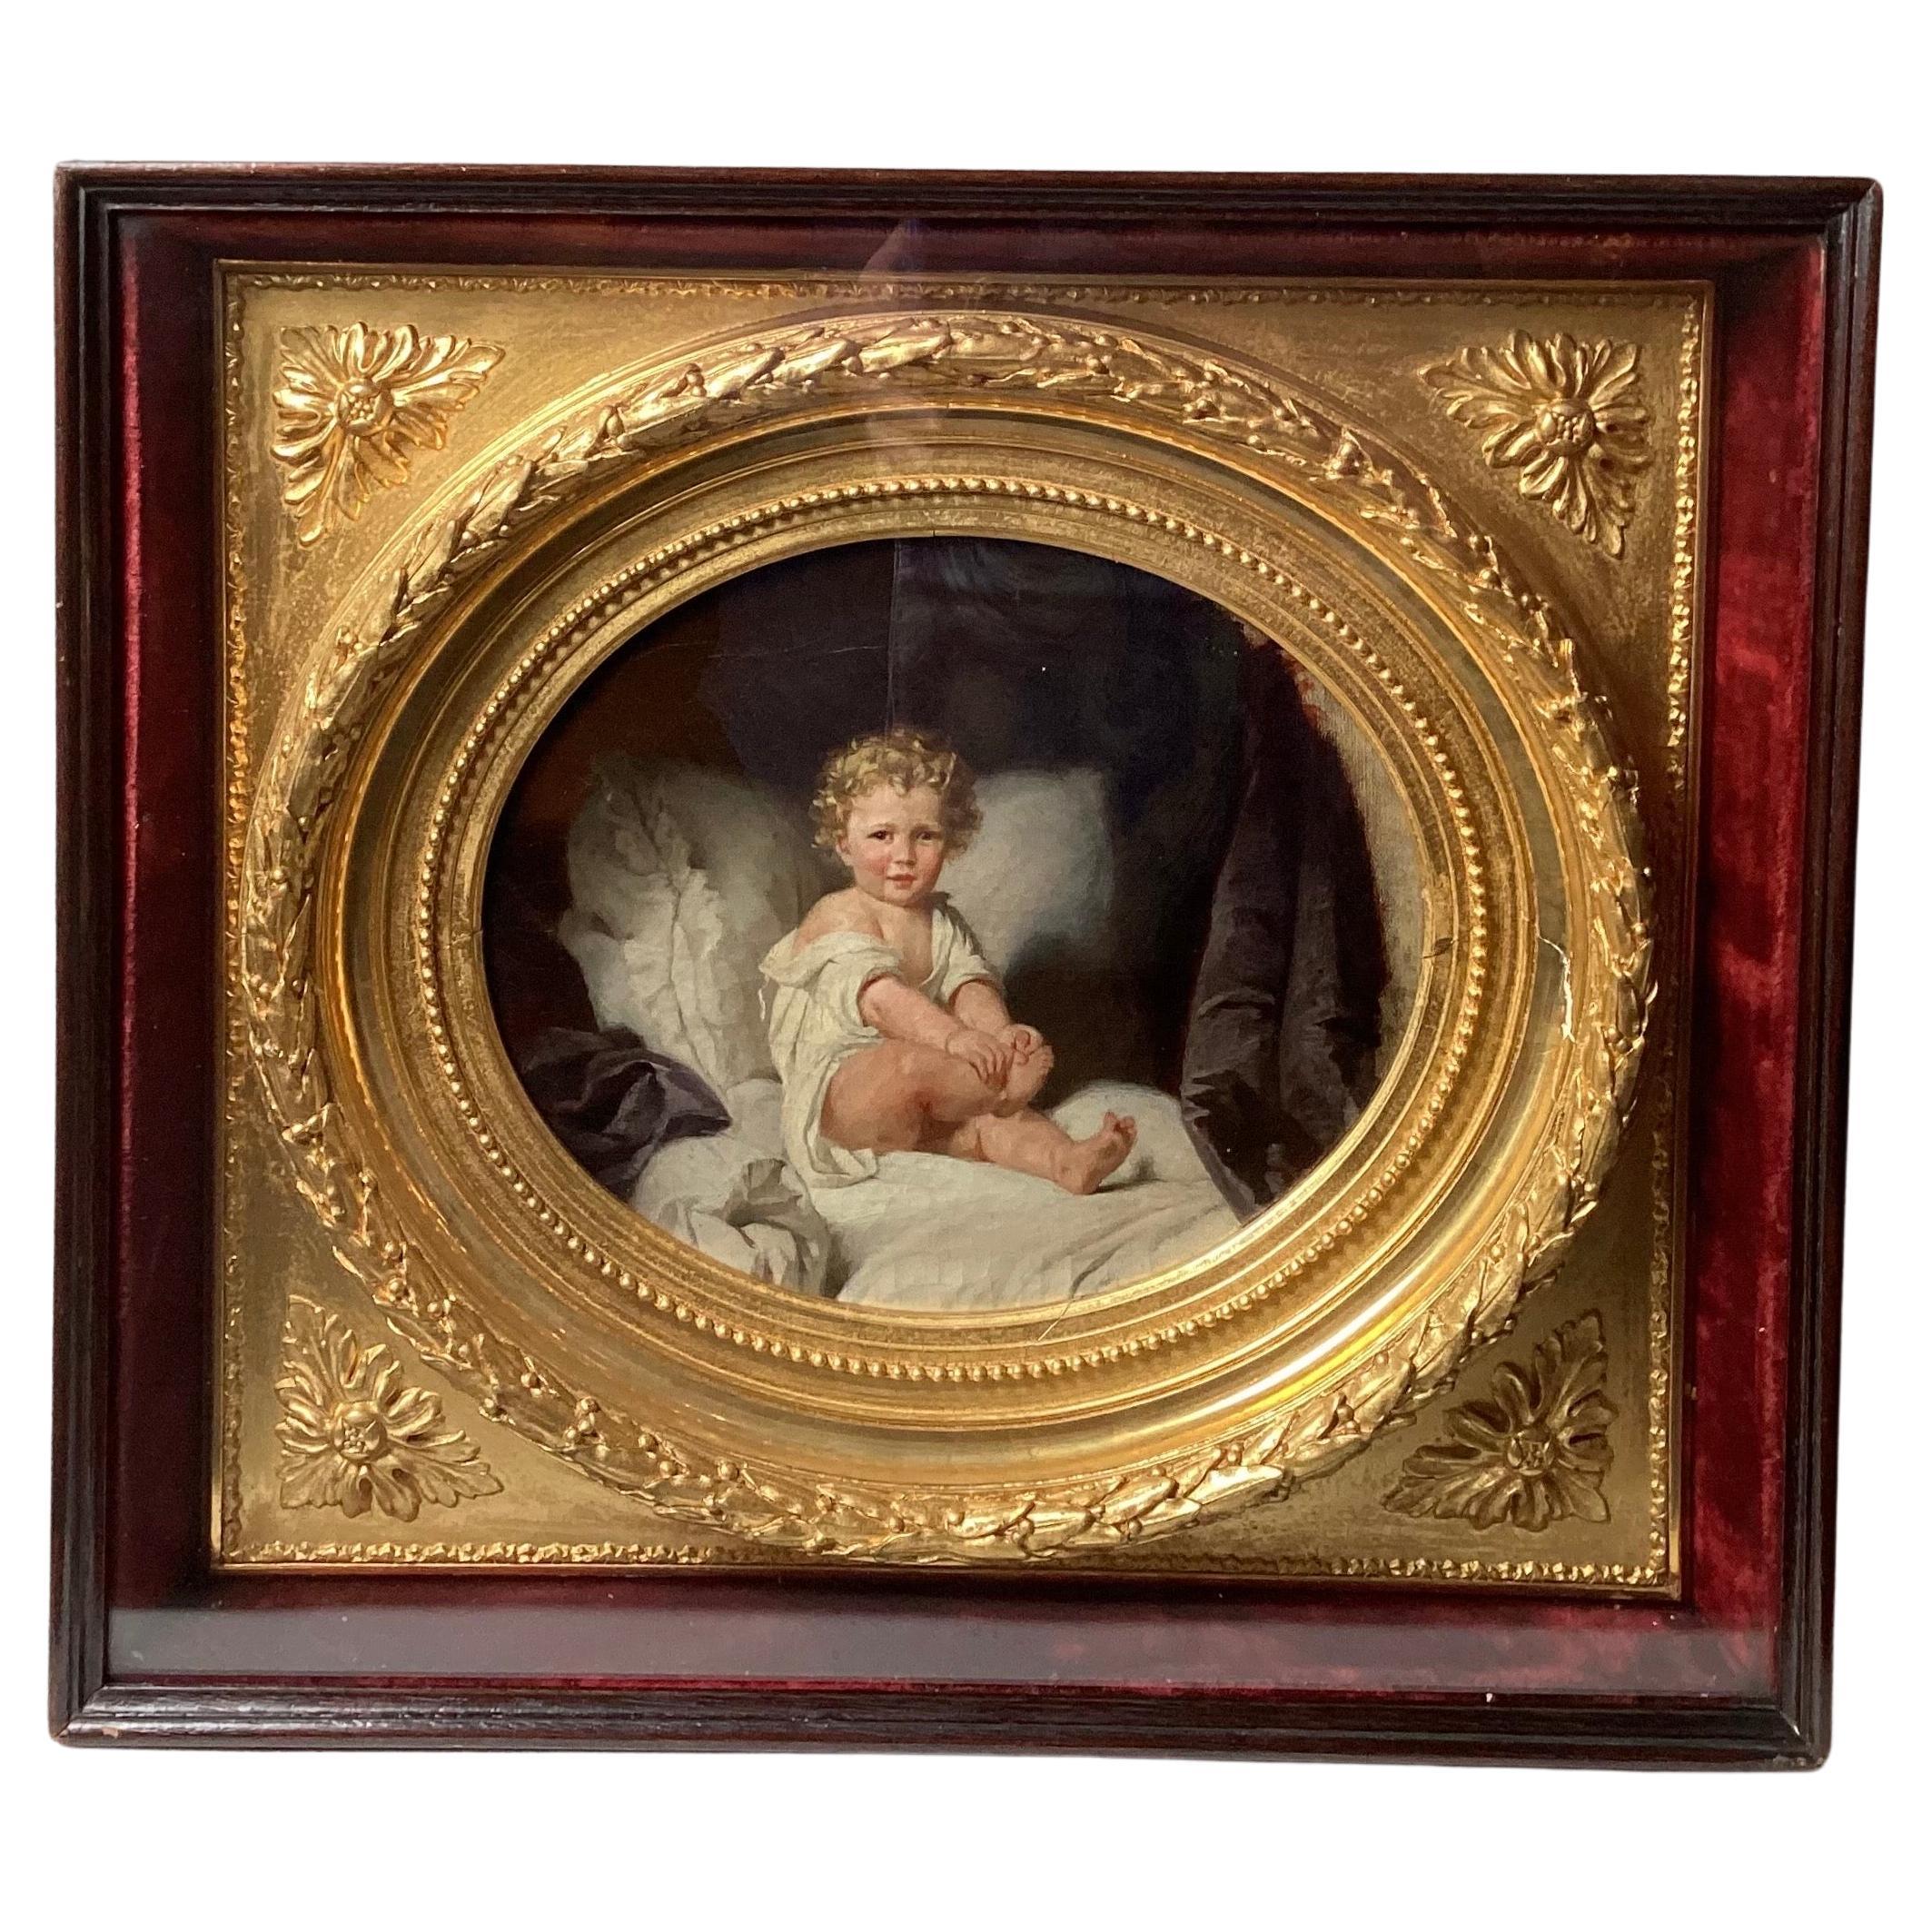 Beautiful Portrait of Young Boy with GOlden Hair in a Stunning Original giltwood